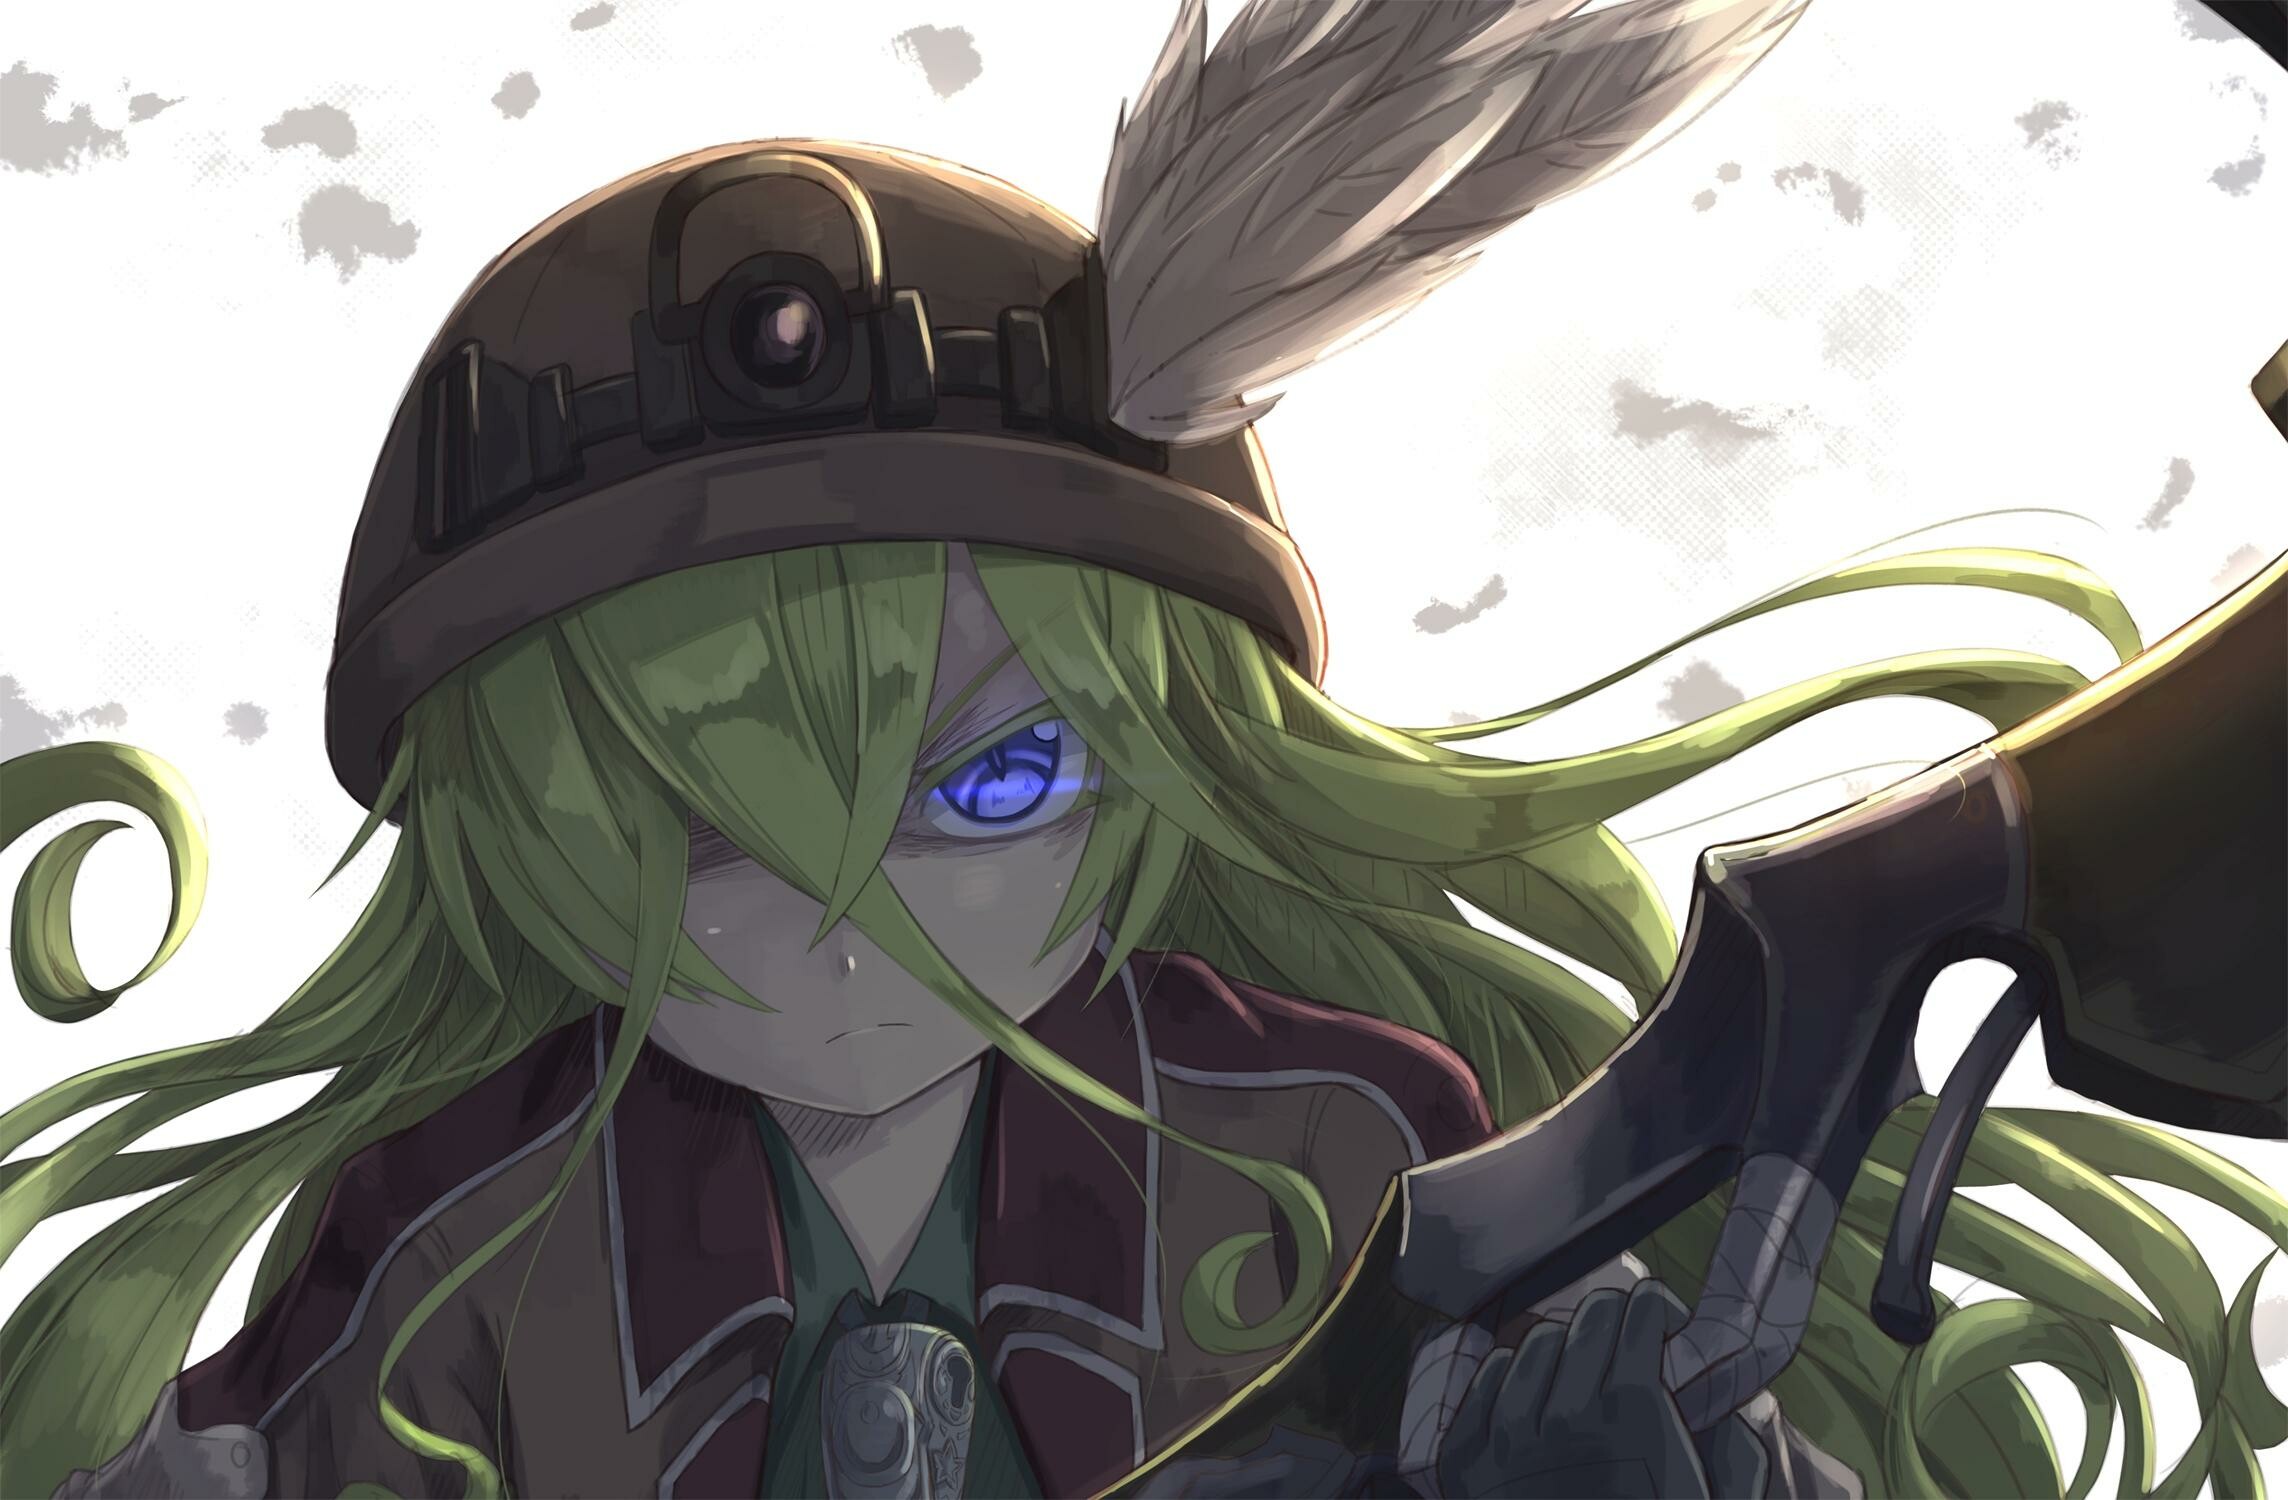 Made in Abyss: Dawn of the Deep Soul: Lyza "The Annihilator", also known as the "Sovereign of Annihilation". 2290x1500 HD Wallpaper.